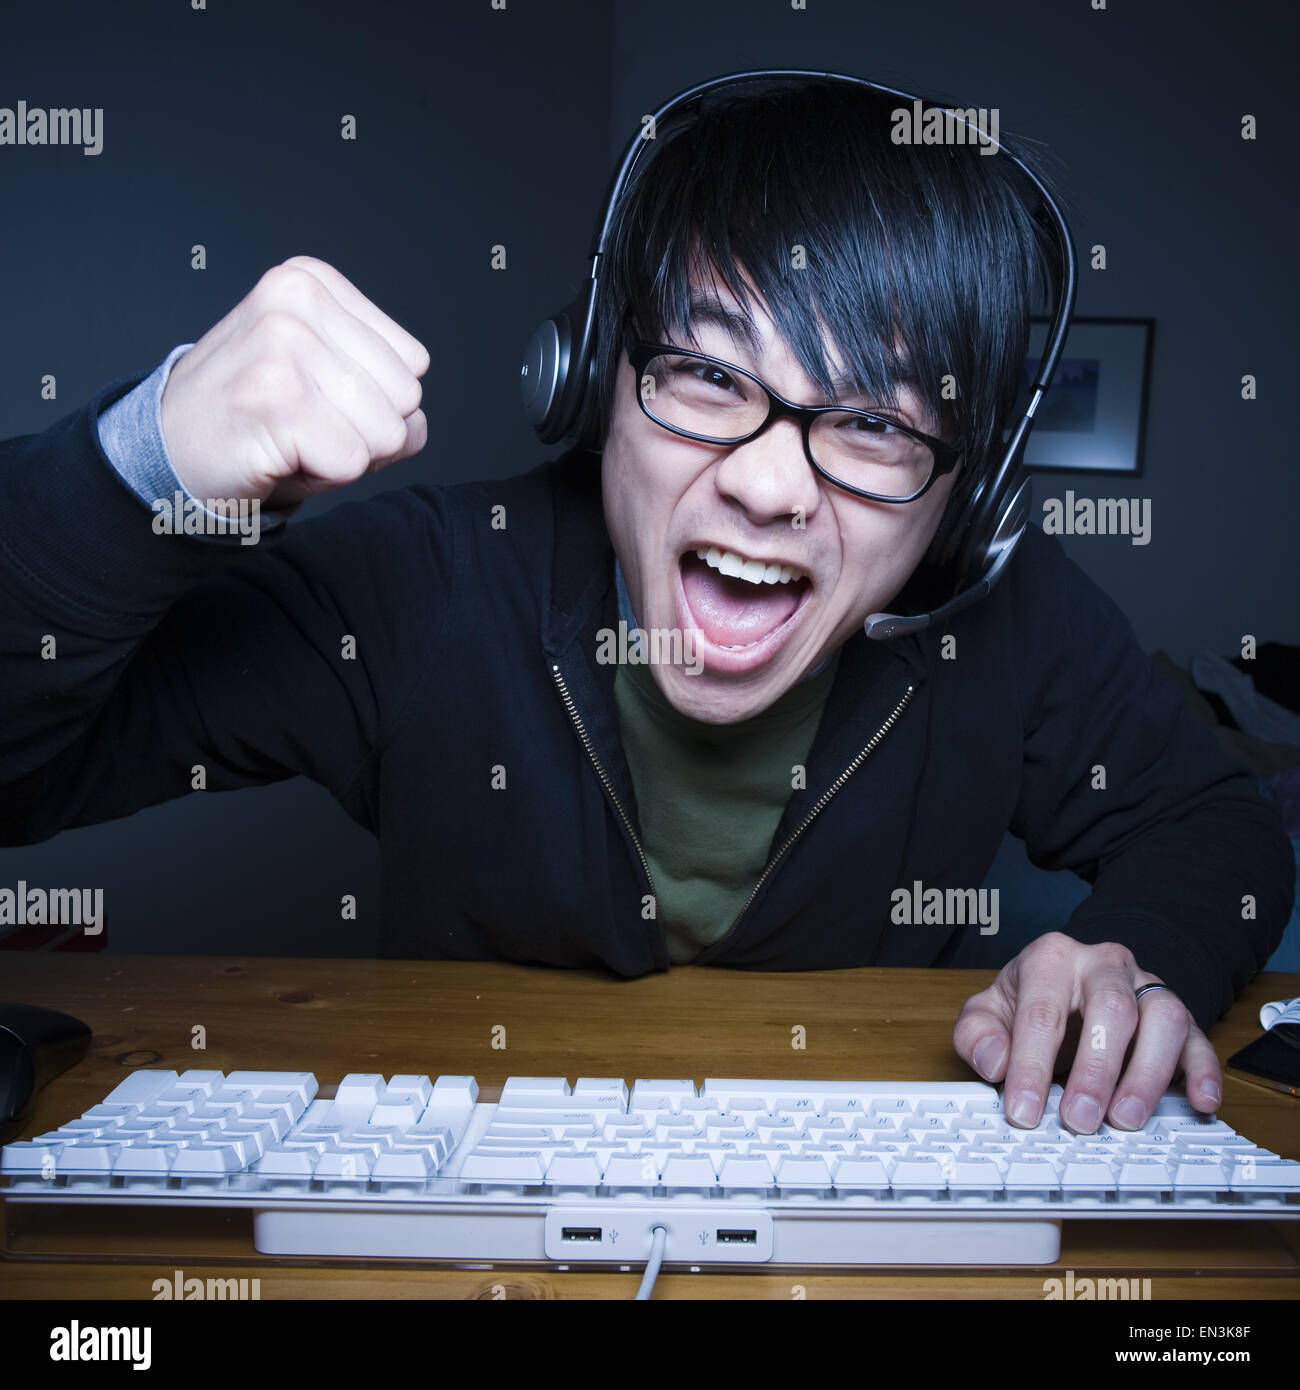 Man with headset making fists and sitting at keyboard Stock Photo